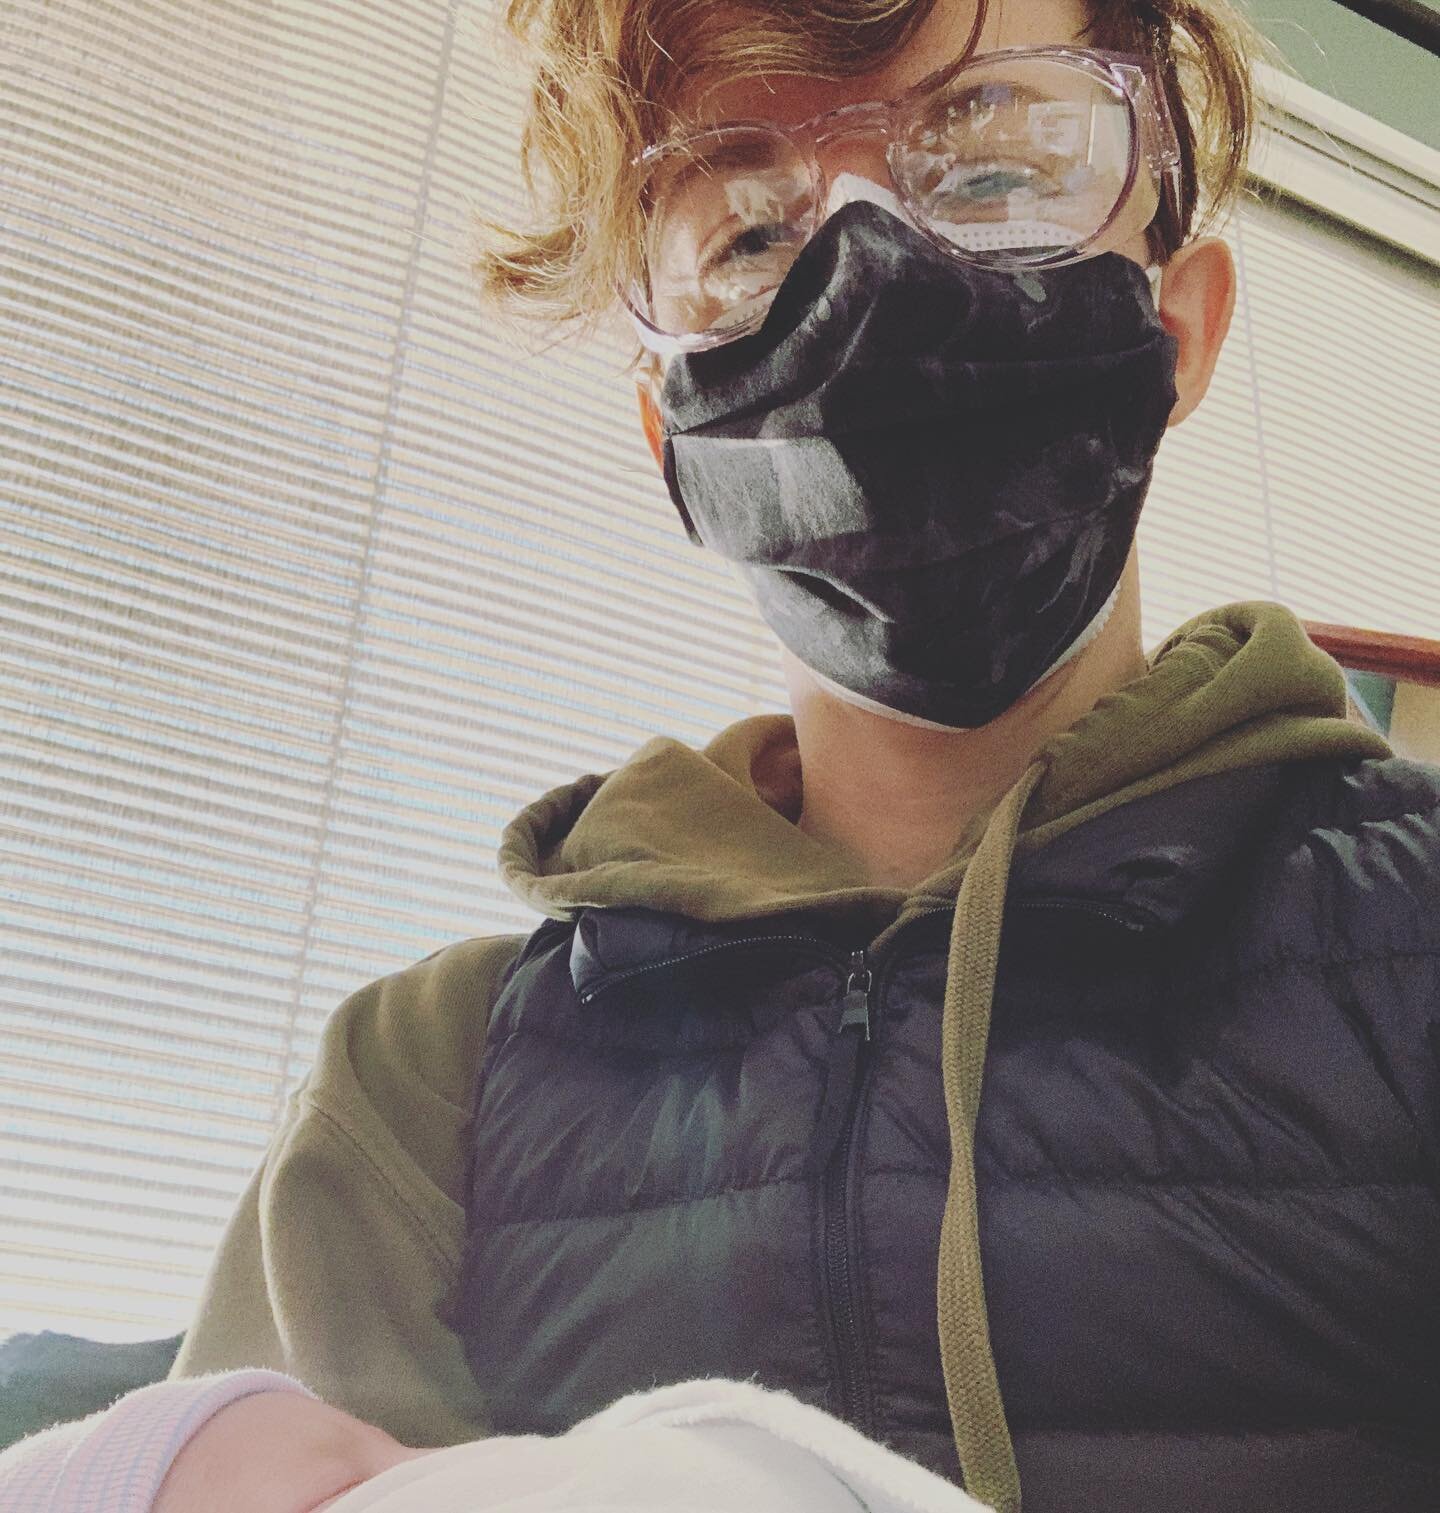 It&rsquo;s a good day to have a baby!! Loving my @wearstoggles and mask from @jilllindseystore to keep me safe, while still lookin cute as we welcome these babes into this wild world. #covidwear #birthdoula #nycbirth #sundayfunday #success #nypcornel